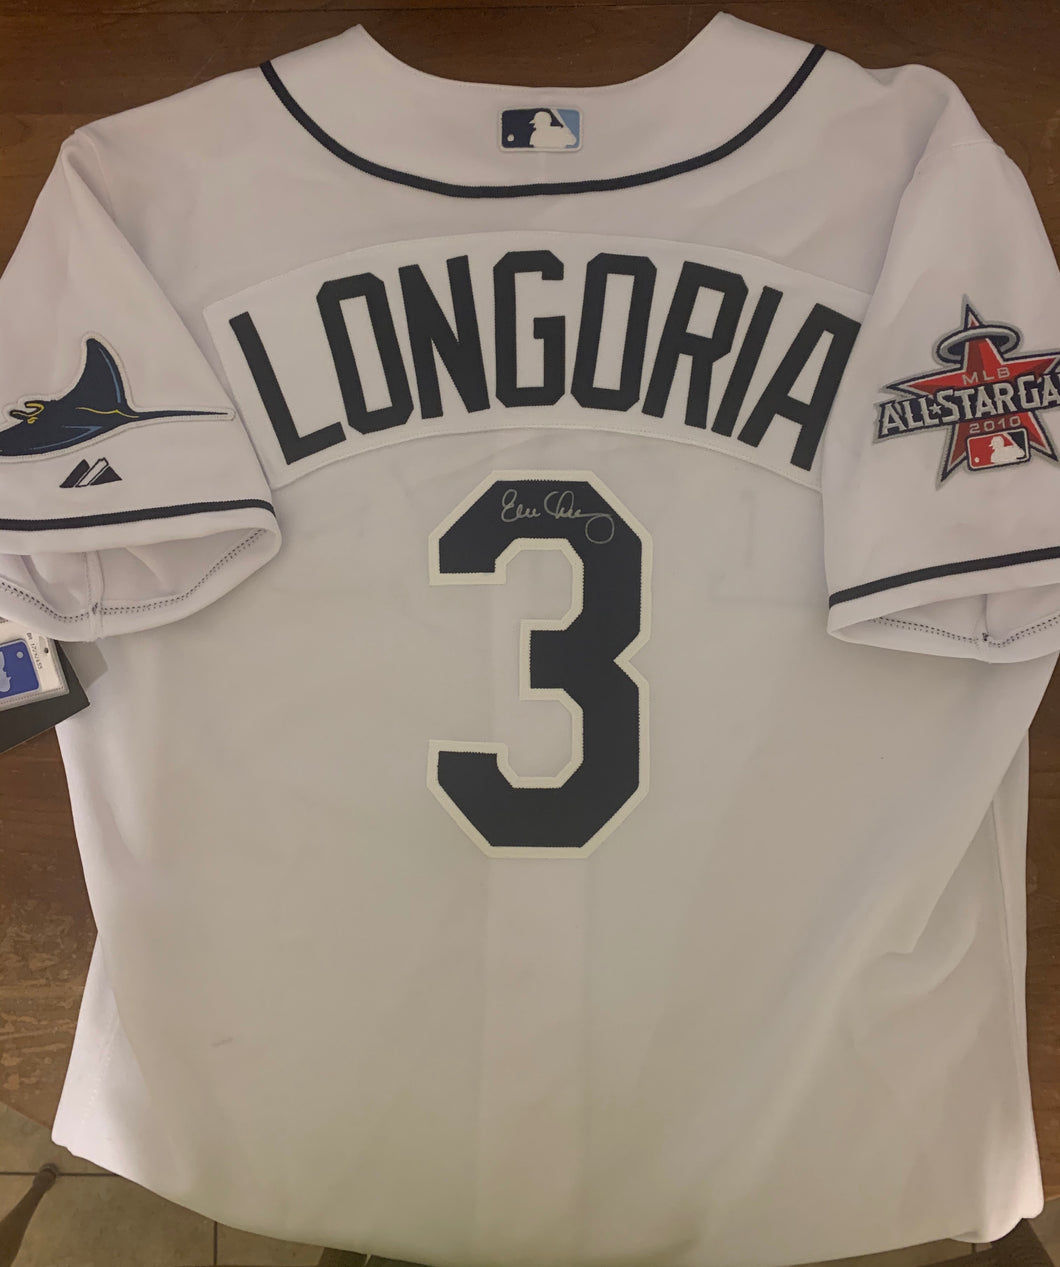 Evan Longoria Autographed Authentic 2010 Rays All-Star Jersey